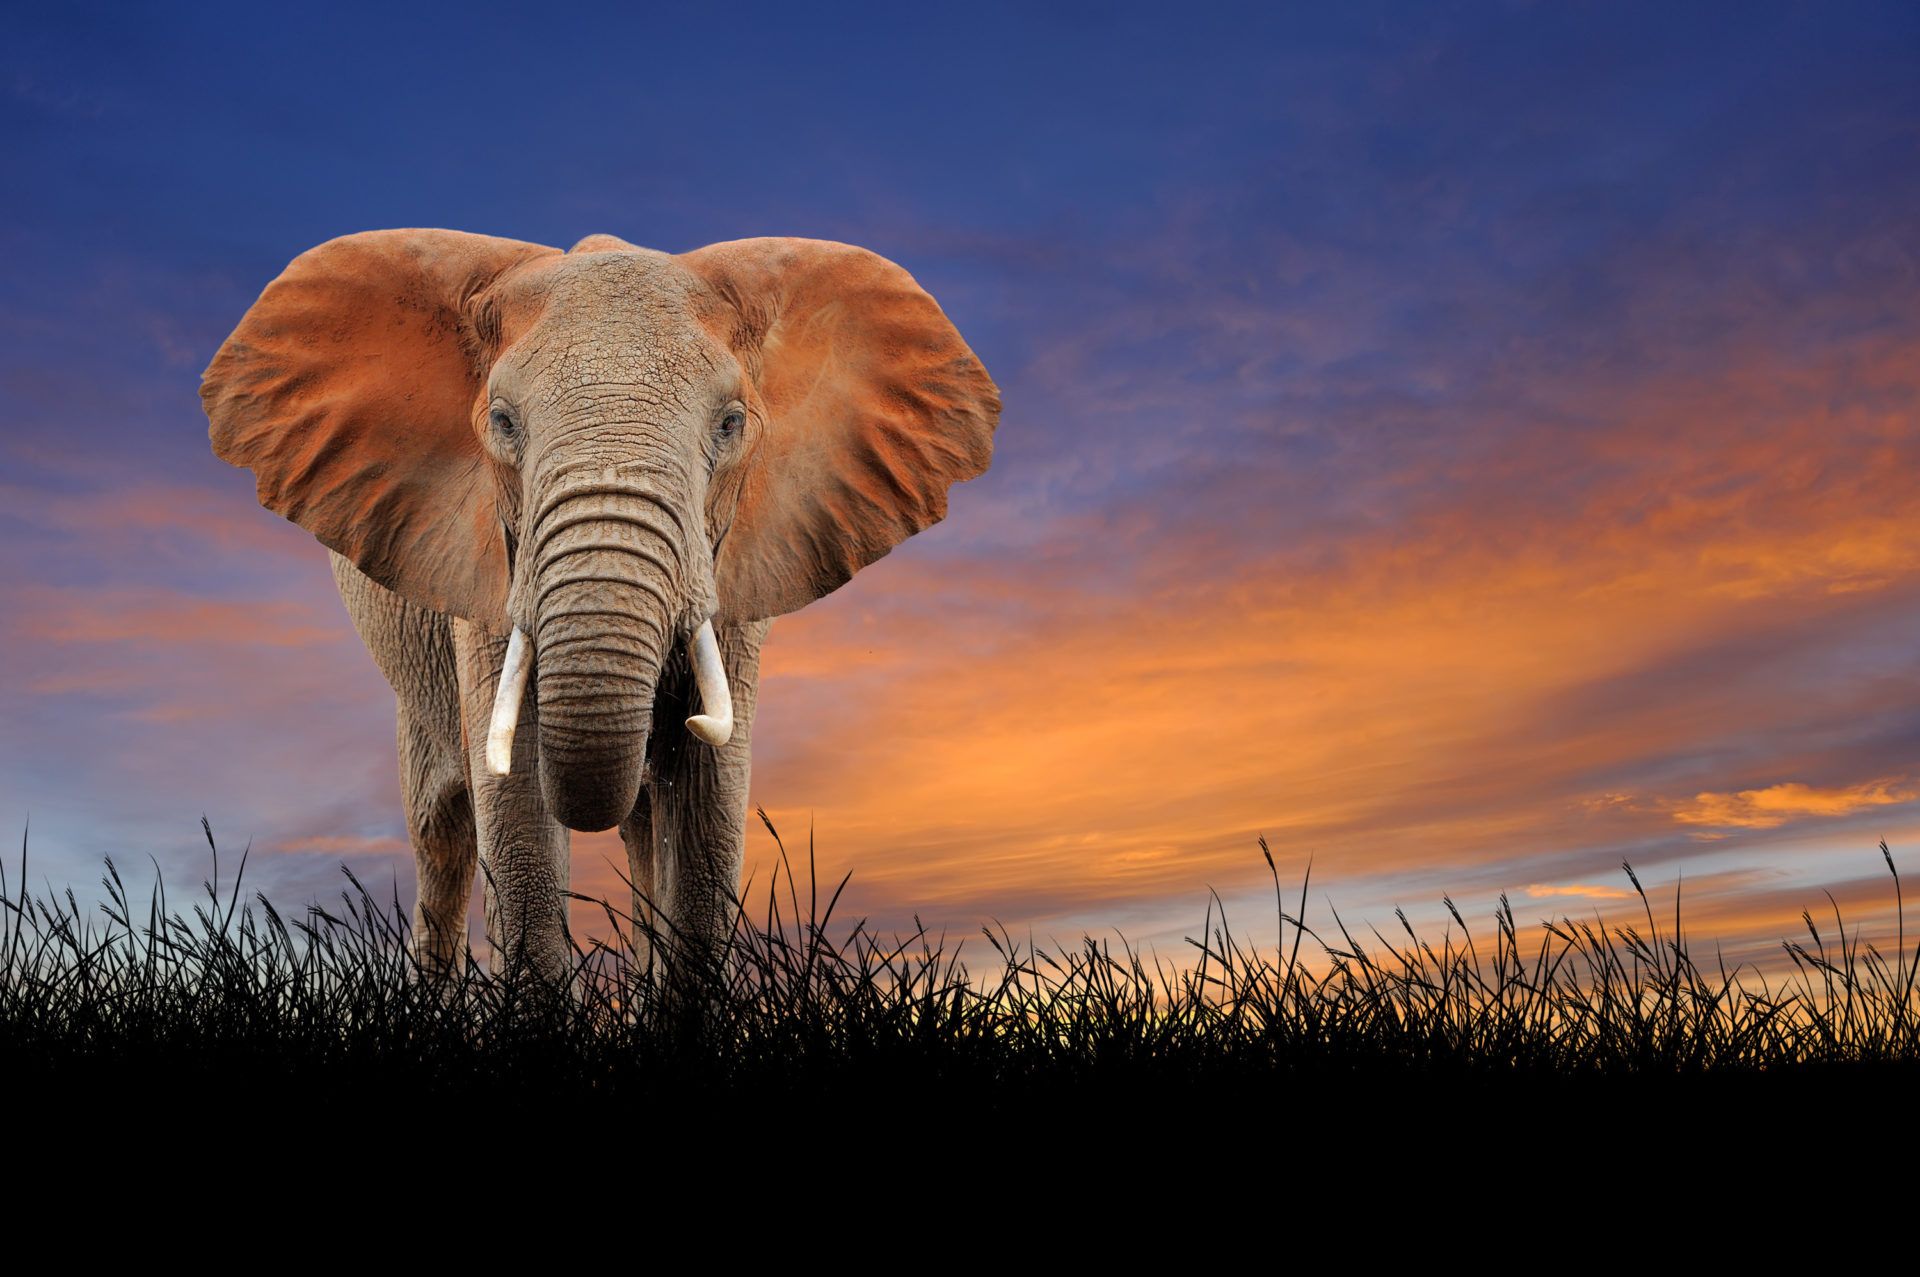 Elephants of the Most Endangered Species on the Planet